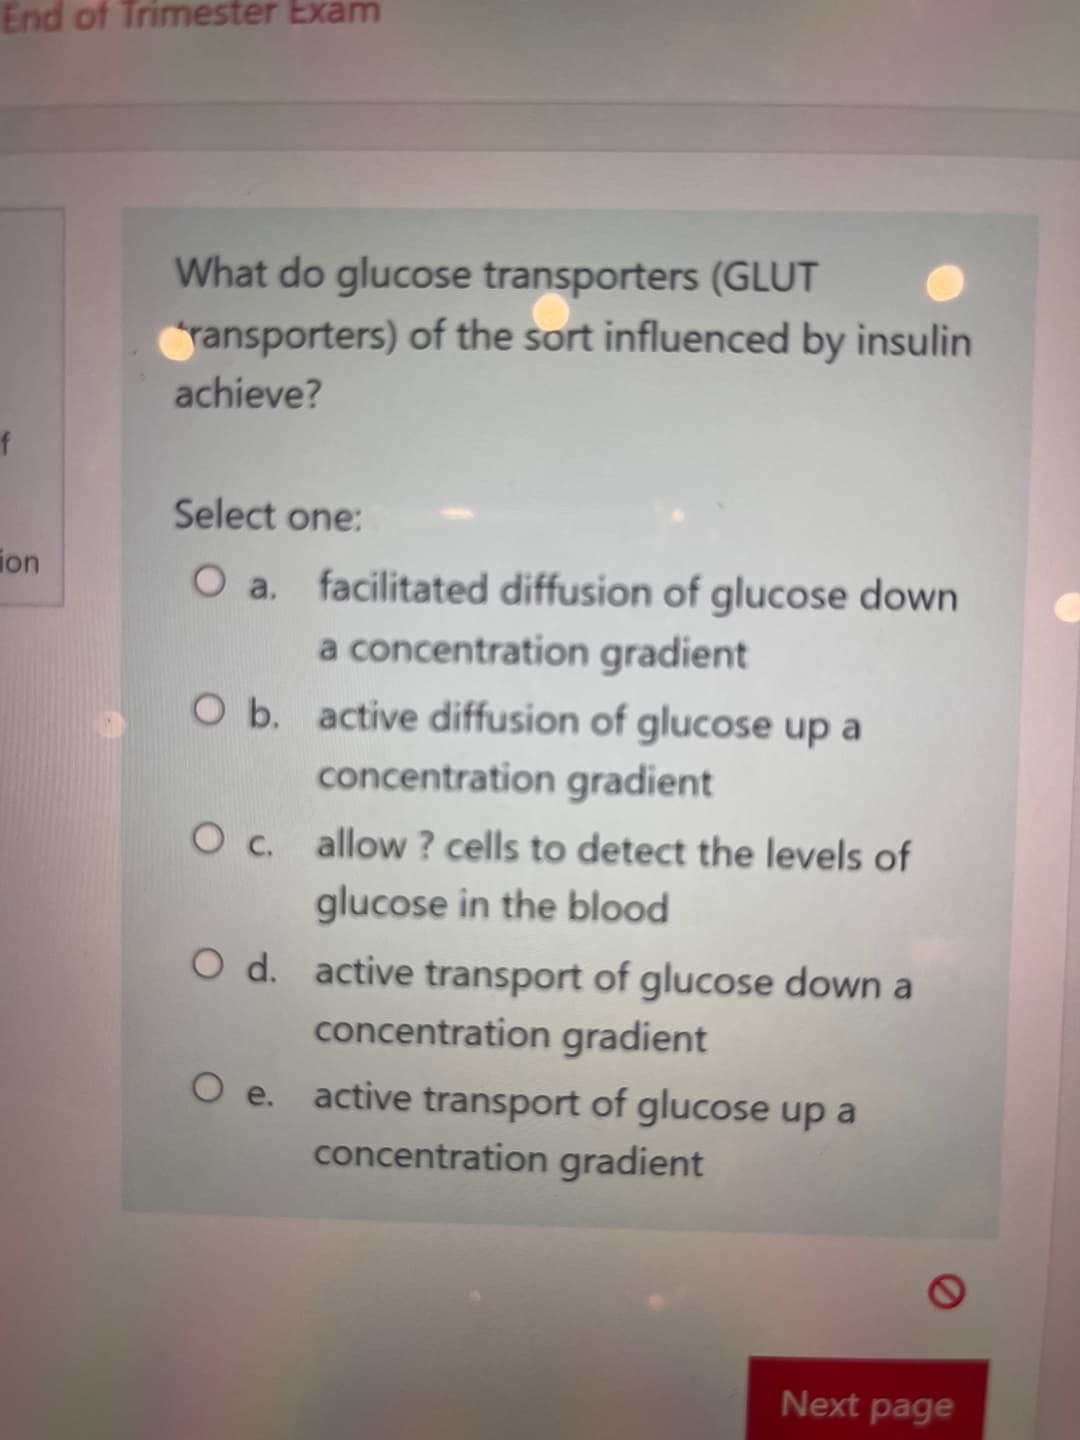 End of Trimester Exam
f
ion
What do glucose transporters (GLUT
transporters) of the sort influenced by insulin
achieve?
Select one:
O a. facilitated diffusion of glucose down
a concentration gradient
O b. active diffusion of glucose up a
concentration gradient
O c. allow? cells to detect the levels of
glucose in the blood
O d. active transport of glucose down a
concentration gradient
O e. active transport of glucose up a
concentration gradient
O
Next page